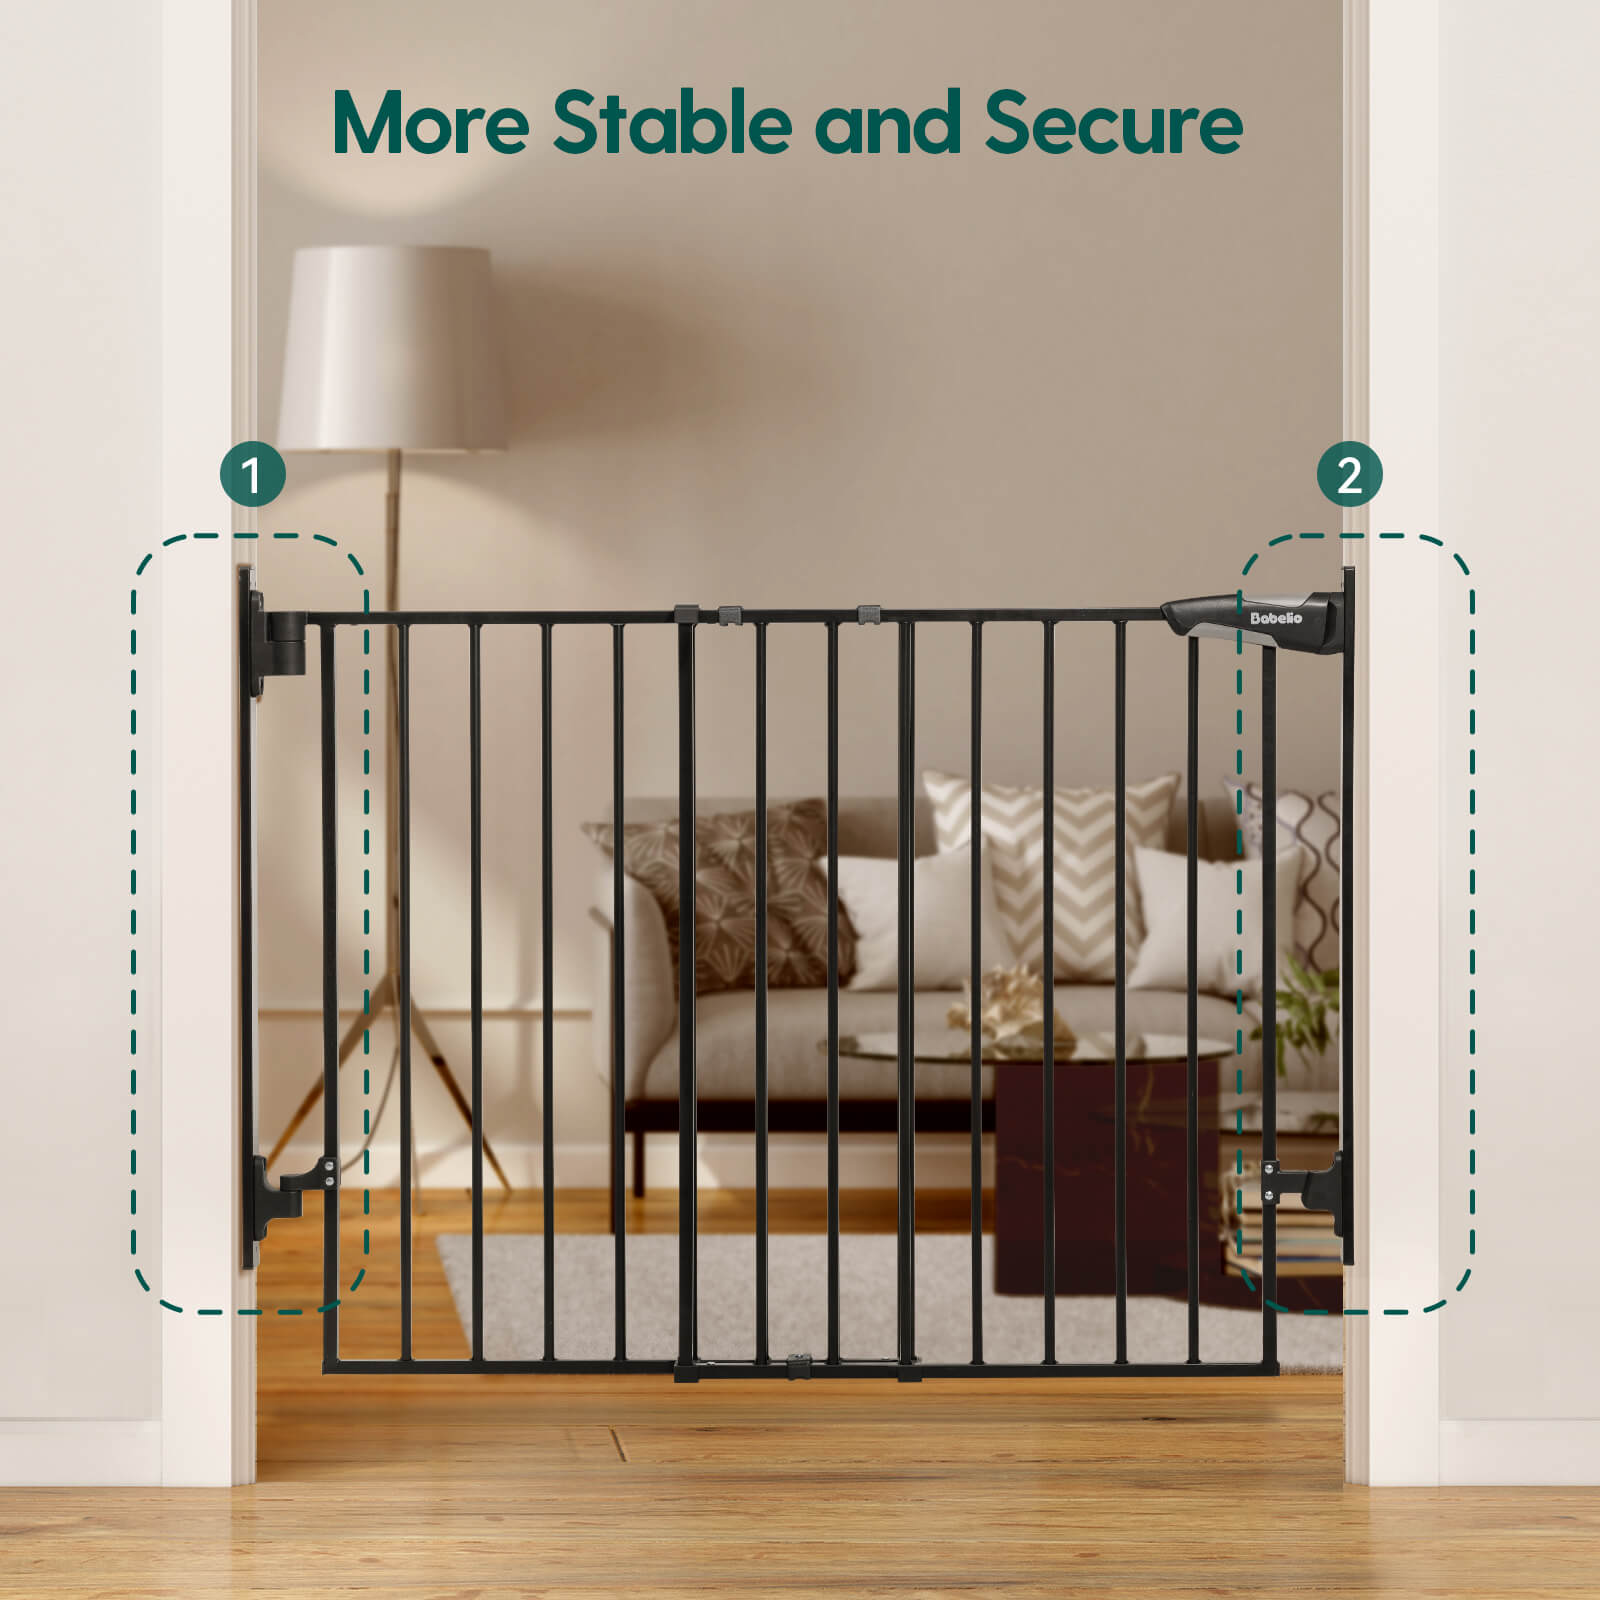 Babelio 27-45" 2-in-1 Auto-Close Baby Gate: No Bottom Bar, Easy Installation, Large Walk-Thru Door - Ideal for Home, Stairs, and Doorways